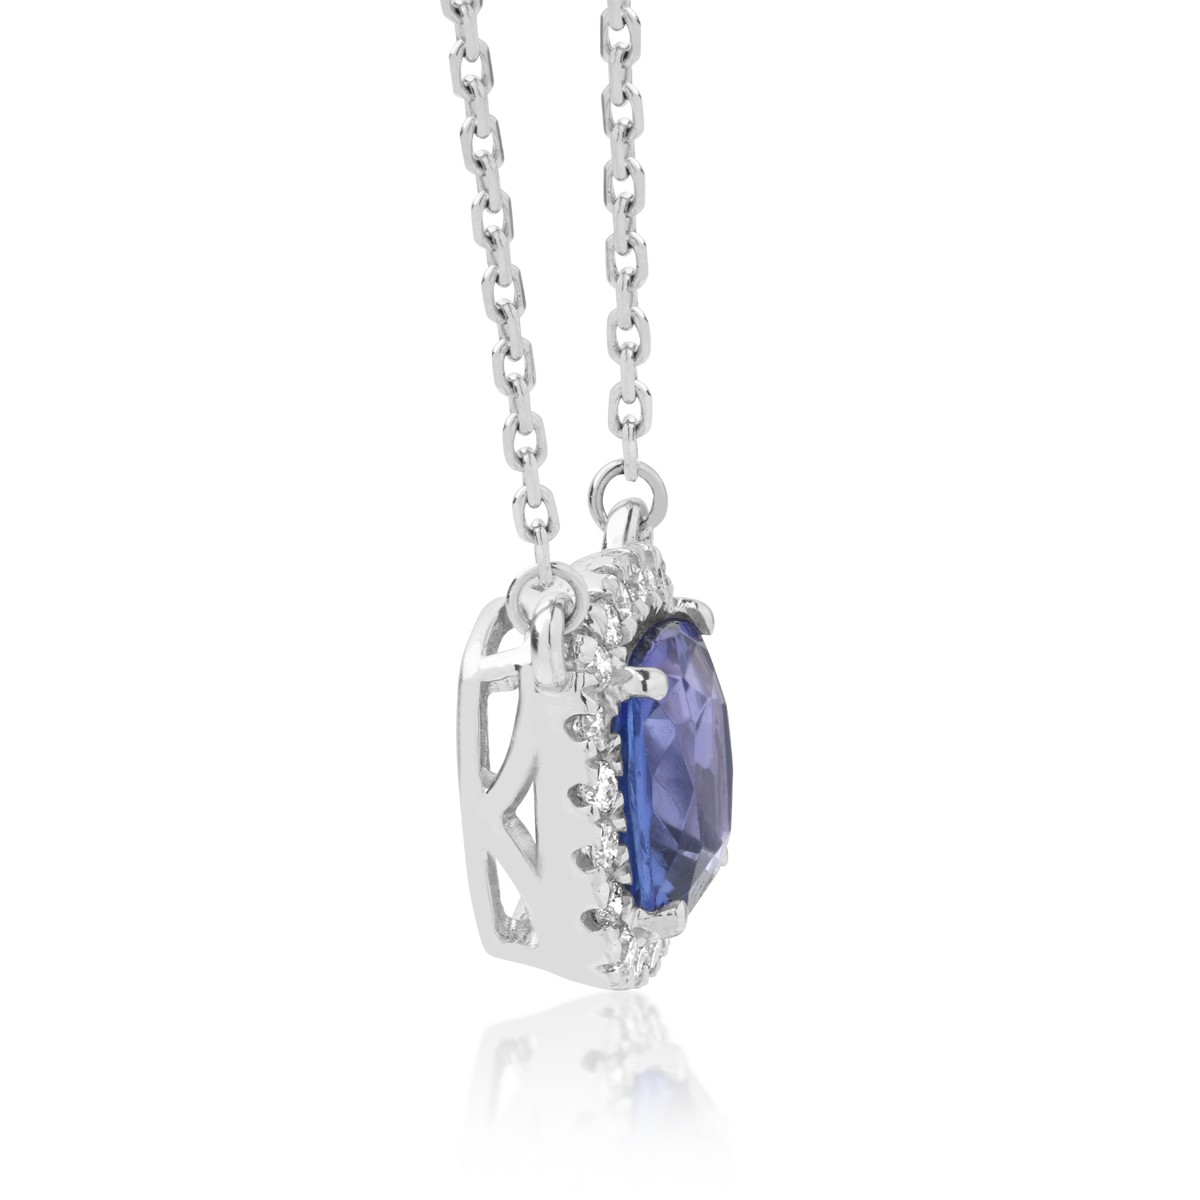 18K white gold pendant necklace with tanzanite of 1.56ct and diamonds of 0.14ct